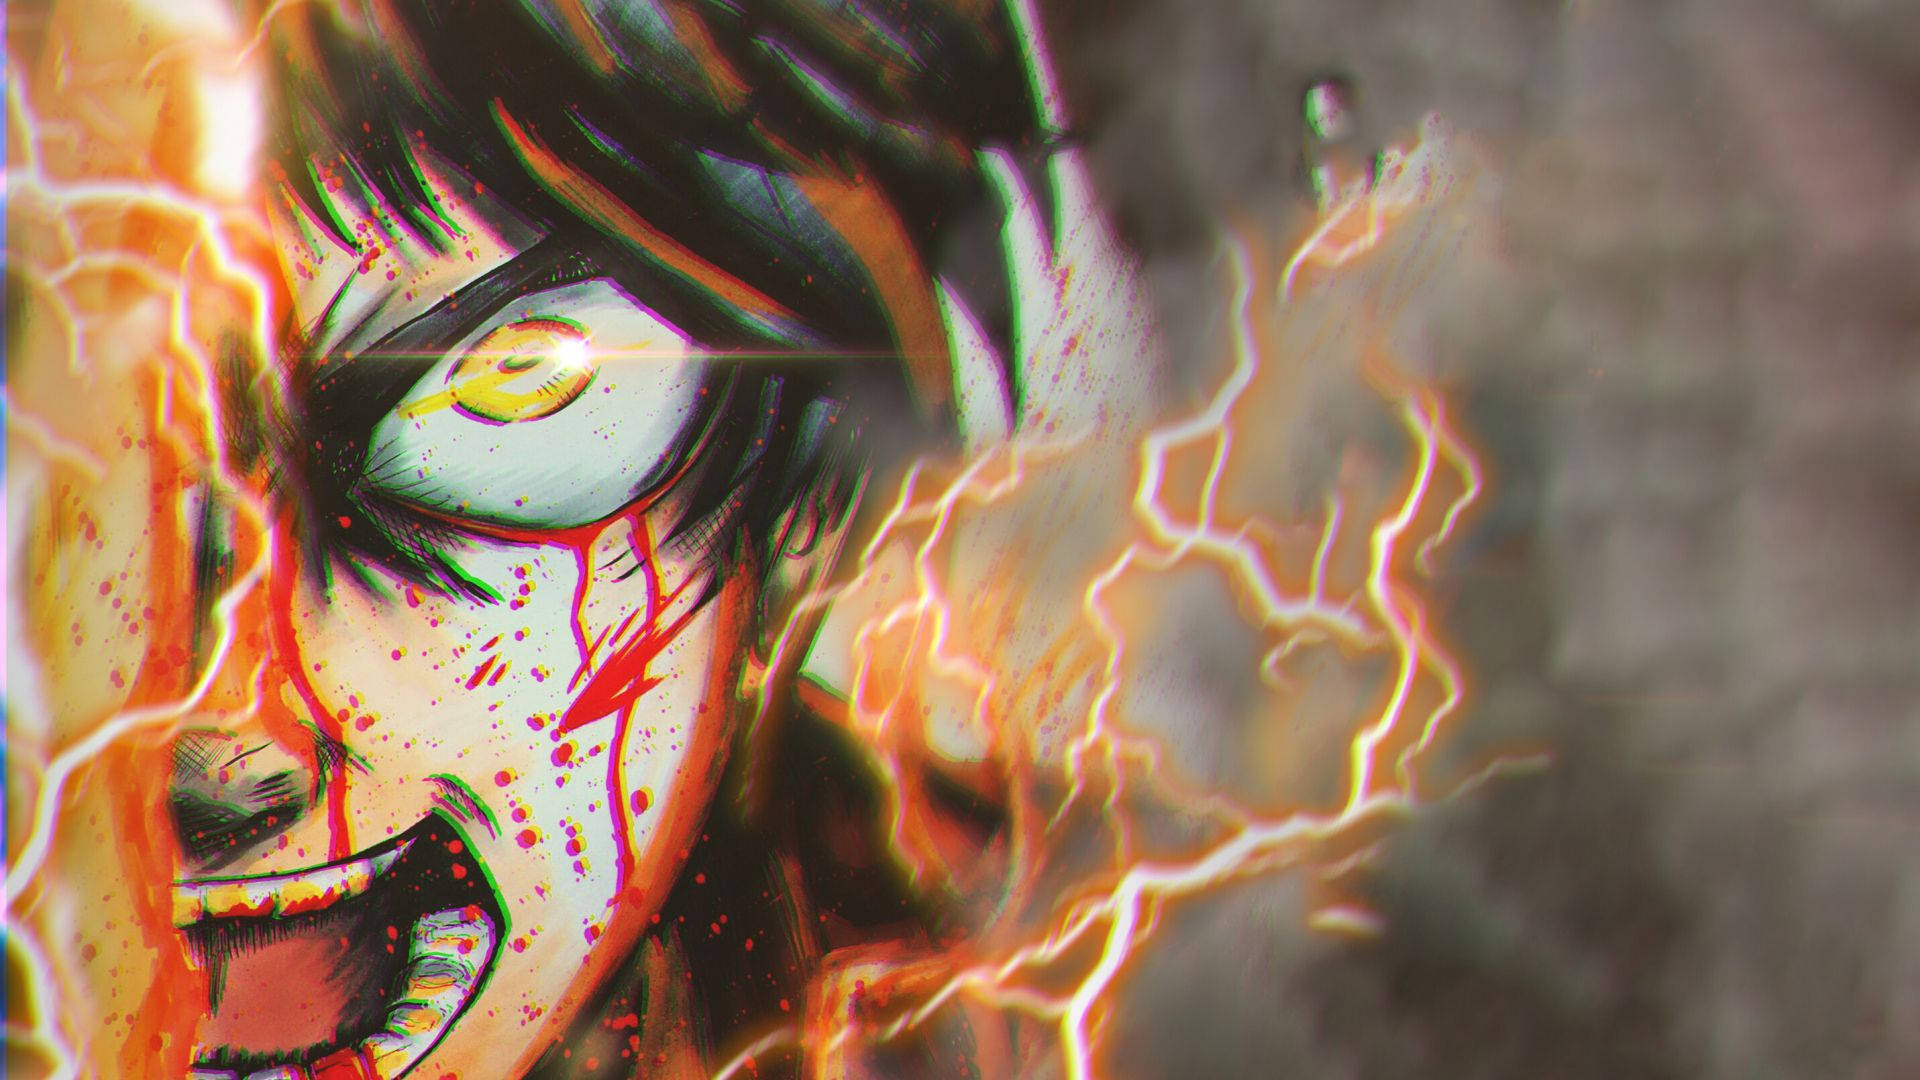 Aot 1920X1080 Wallpaper and Background Image